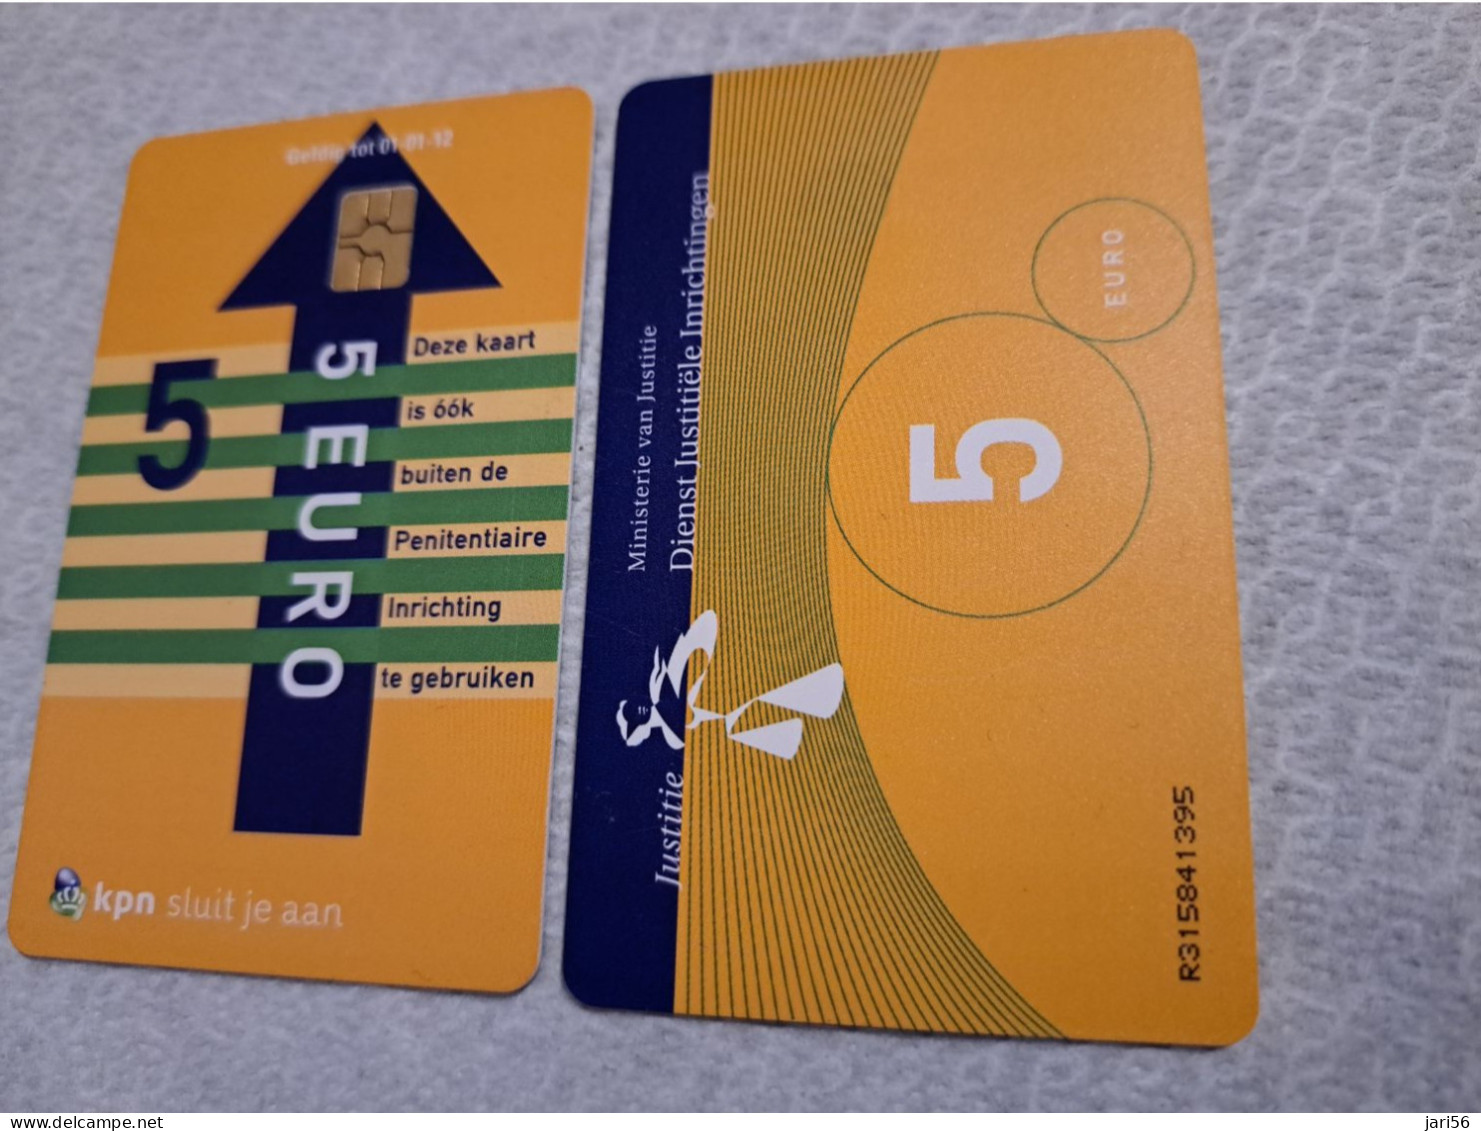 NETHERLANDS   € 5,-  ,-  / USED  / DATE  01-01-12  JUSTITIE/PRISON CARD  CHIP CARD/ USED   ** 16144** - [3] Sim Cards, Prepaid & Refills